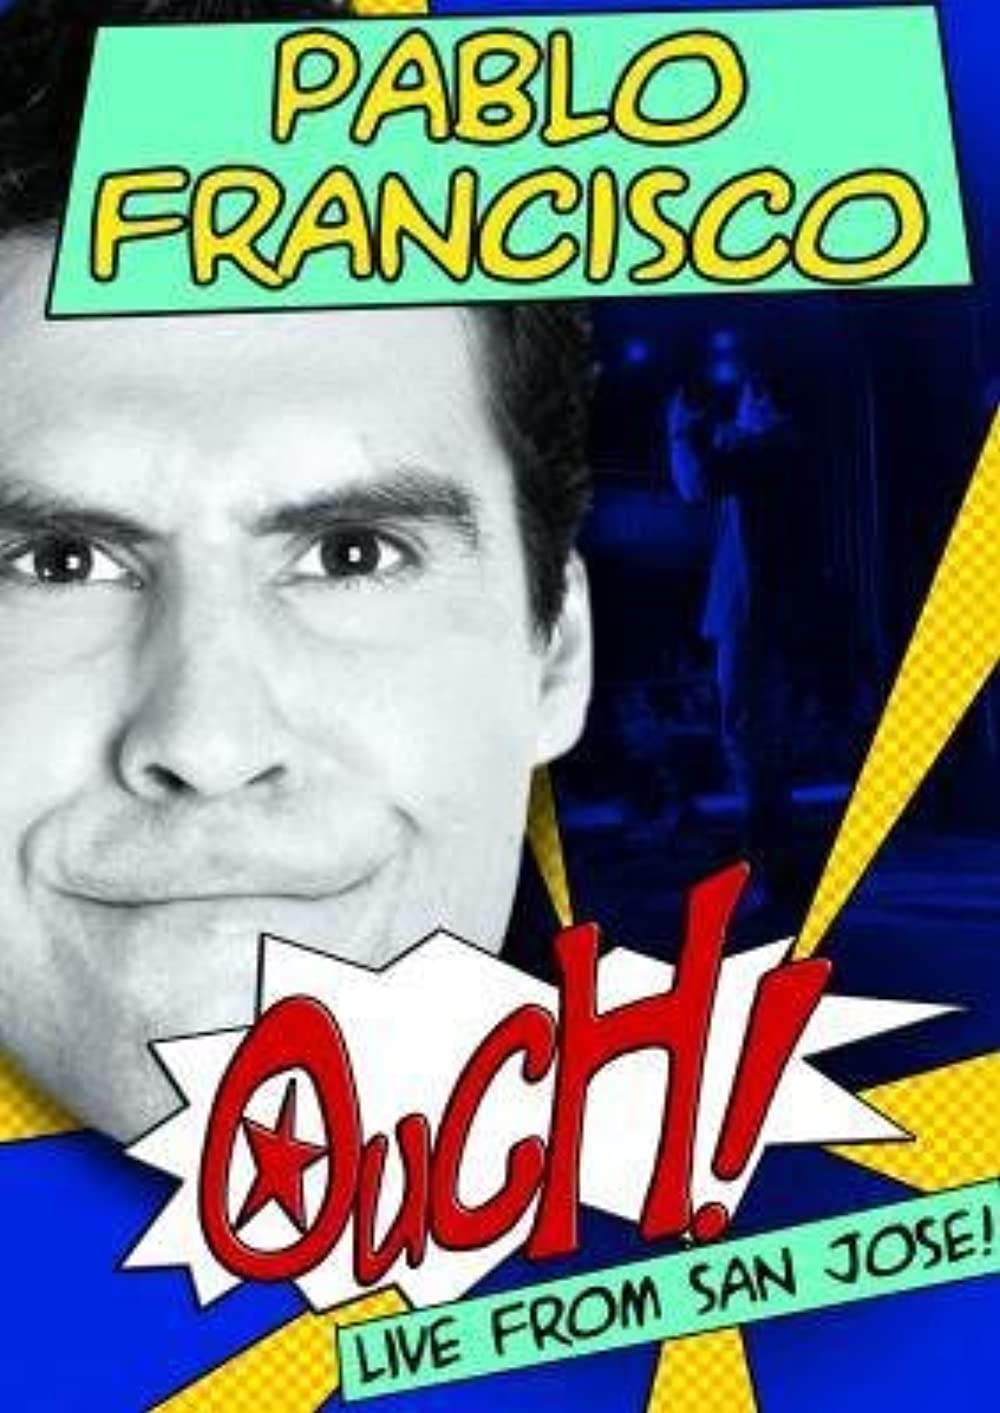 Download Pablo Francisco: Ouch! Live from San Jose Movie | Pablo Francisco: Ouch! Live From San Jose Online